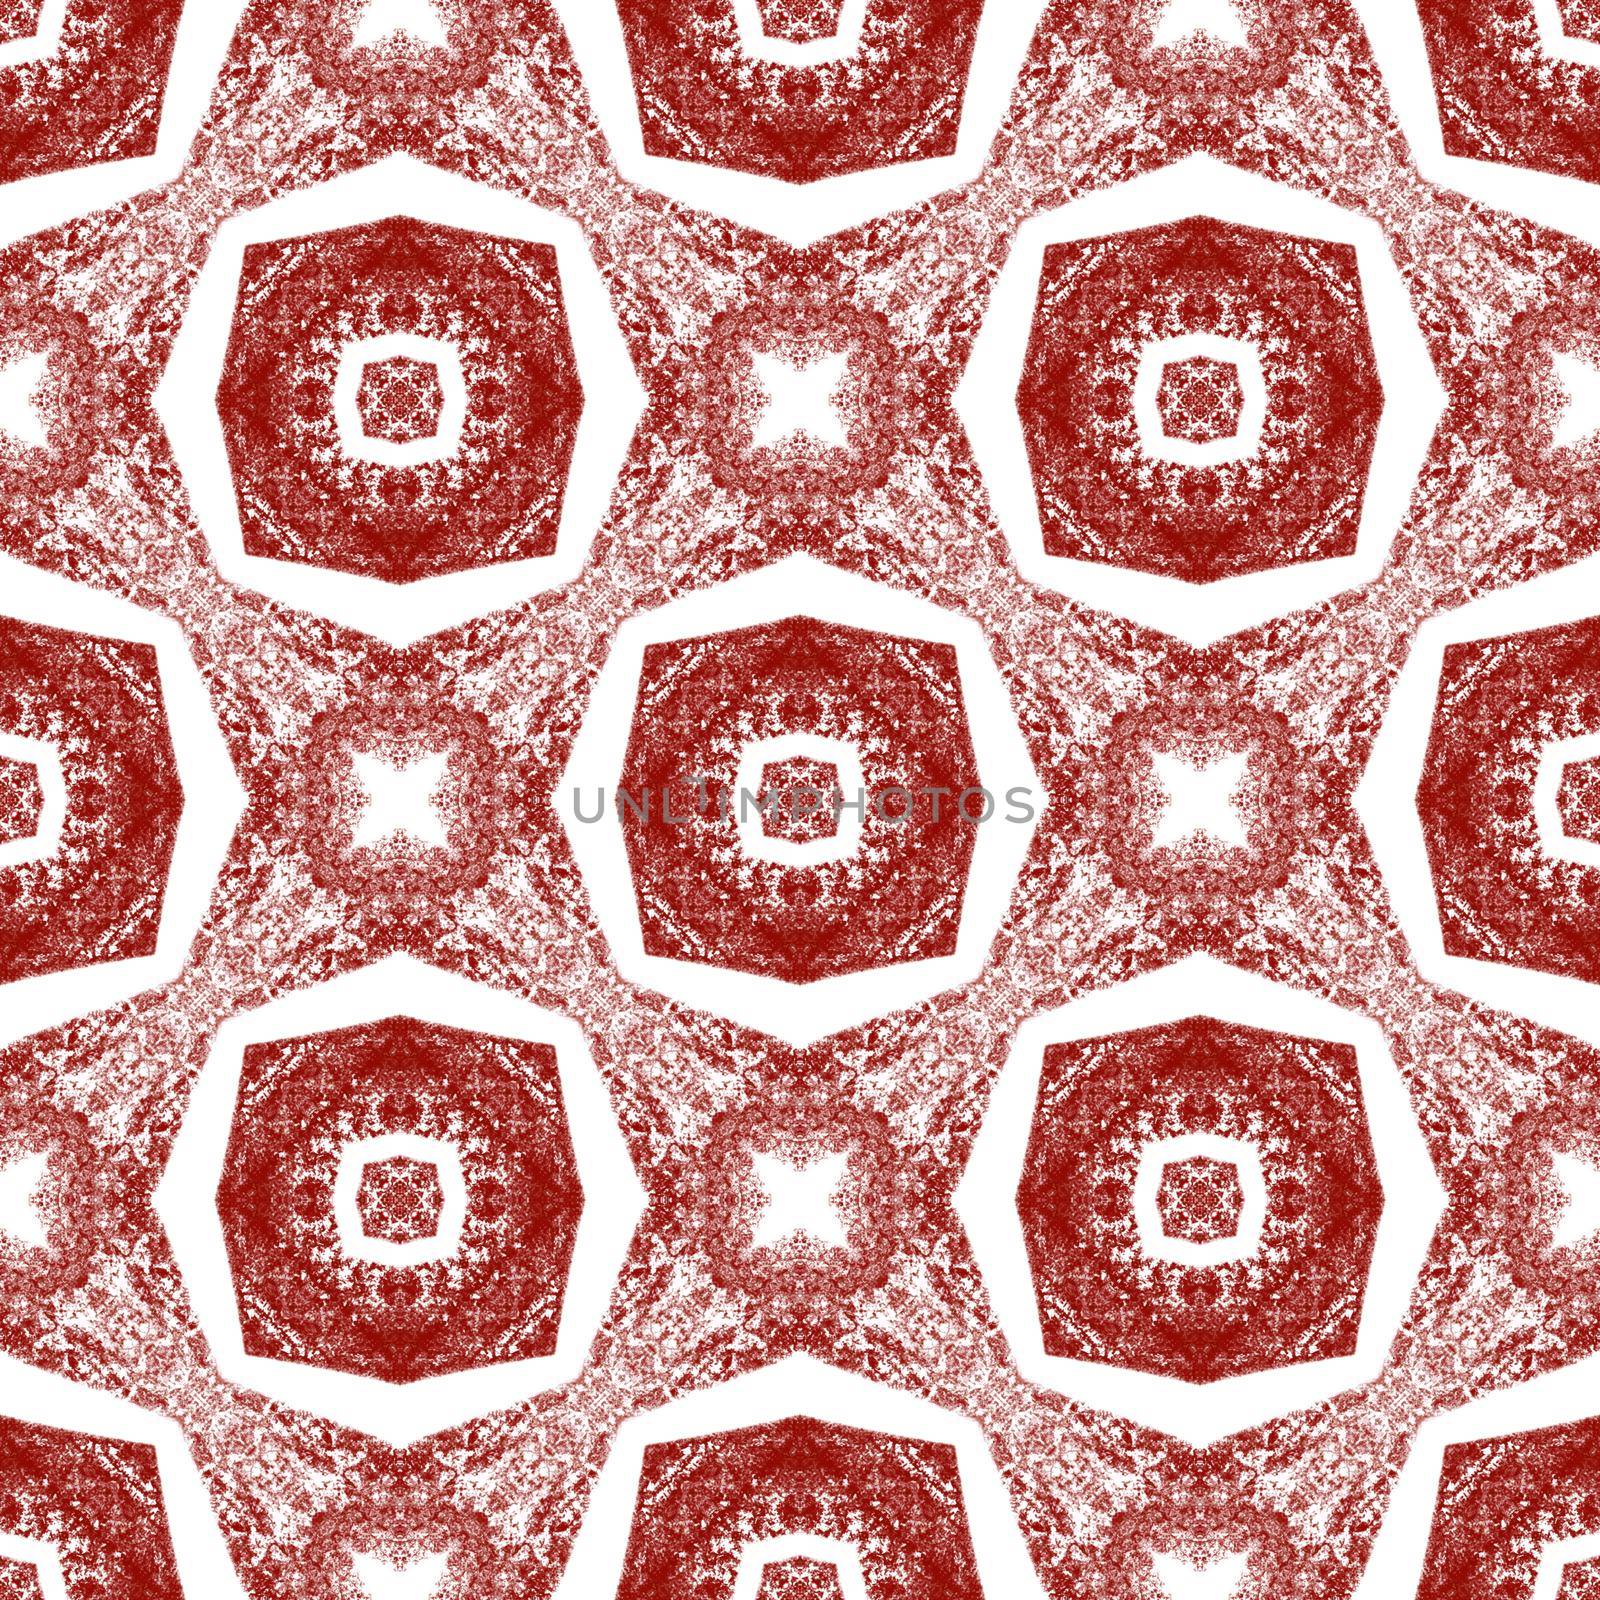 Ethnic hand painted pattern. Wine red symmetrical kaleidoscope background. Summer dress ethnic hand painted tile. Textile ready marvelous print, swimwear fabric, wallpaper, wrapping.